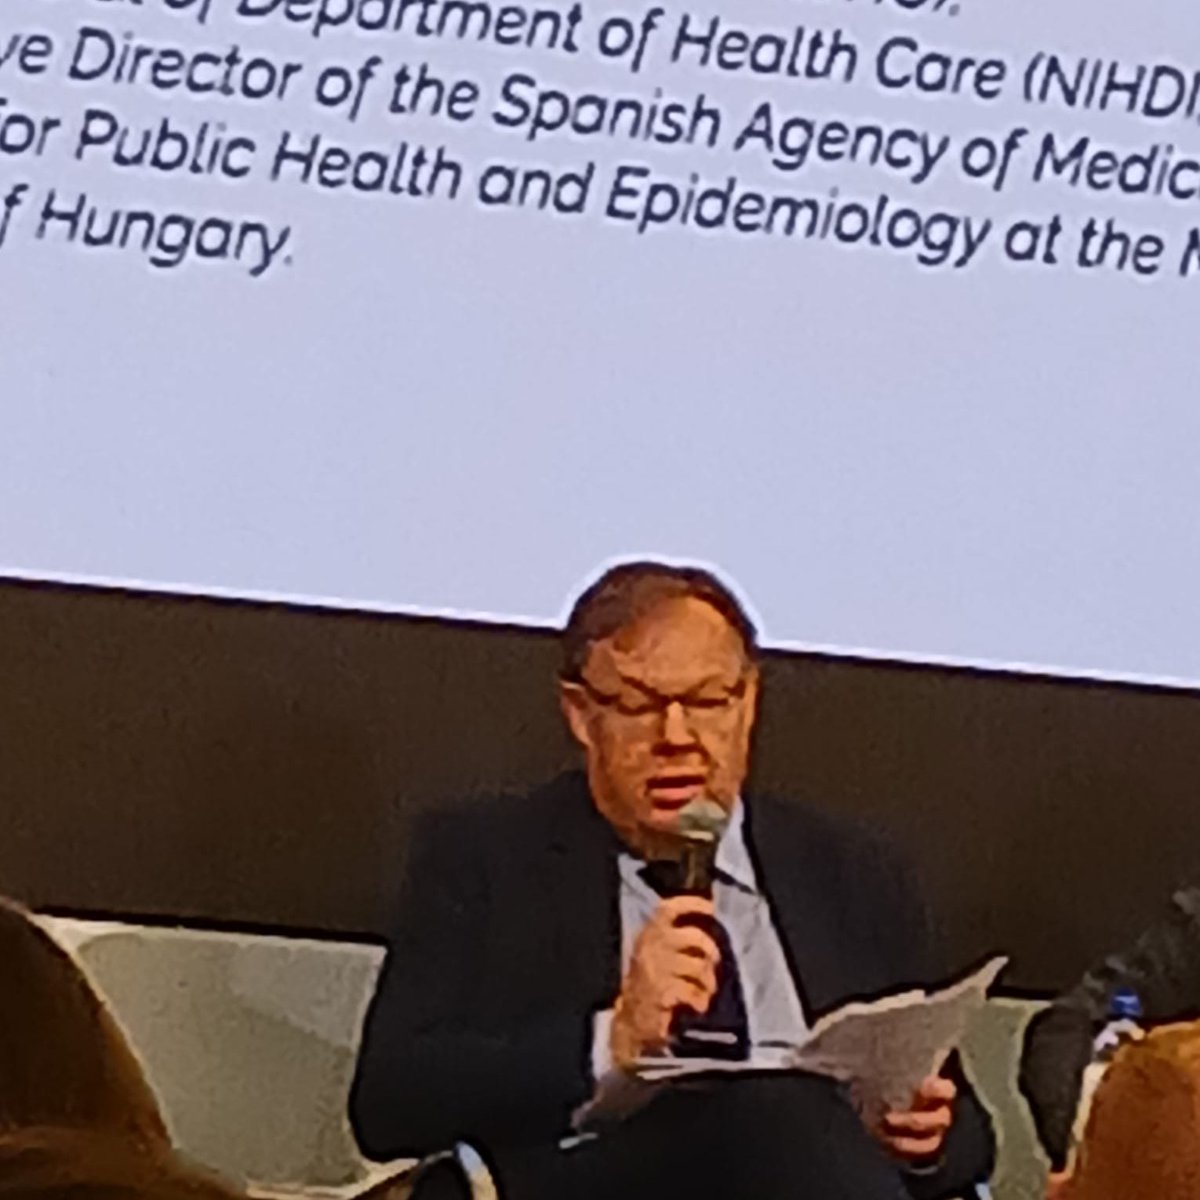 💊 Our President, Dr Christiaan Keijzer, emphasised the need to coordinate activities on #AntimicrobialResistance in the EU at the @EU2024BE High-Level Conference on #AMR #EU2024BE